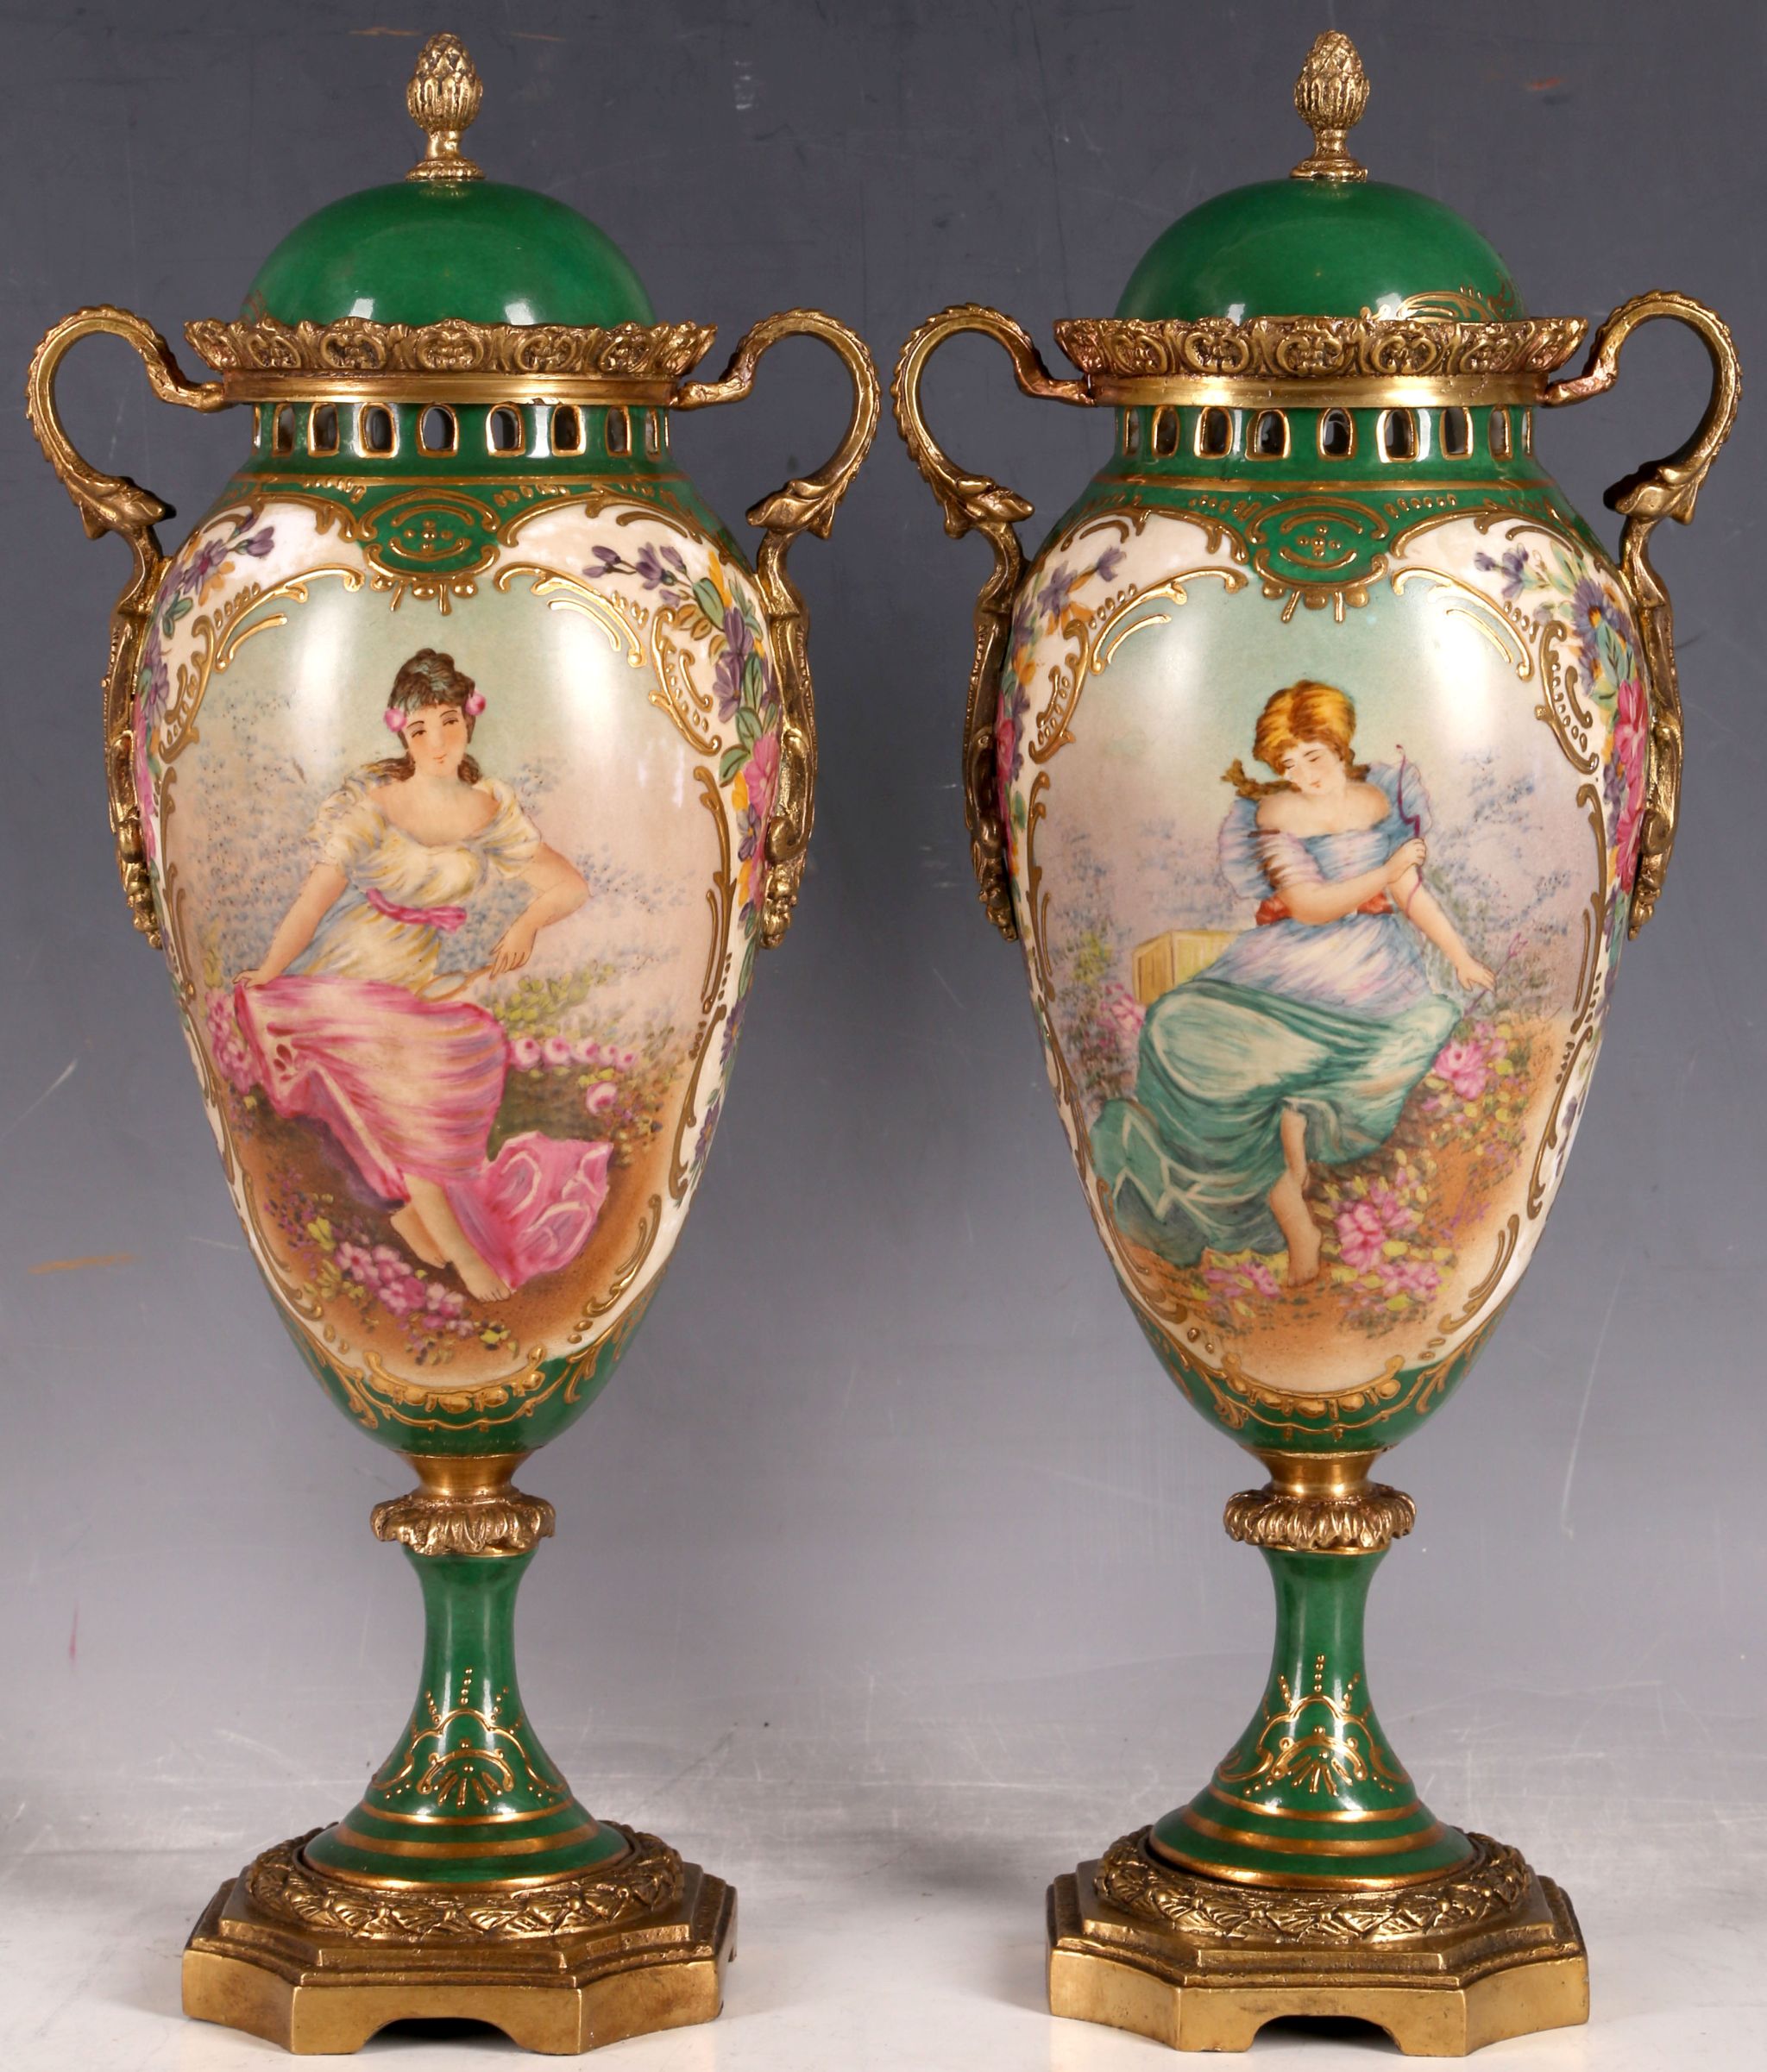 A pair of green glaze Empire style lidded jars, central panel with beauty, gilt and floral